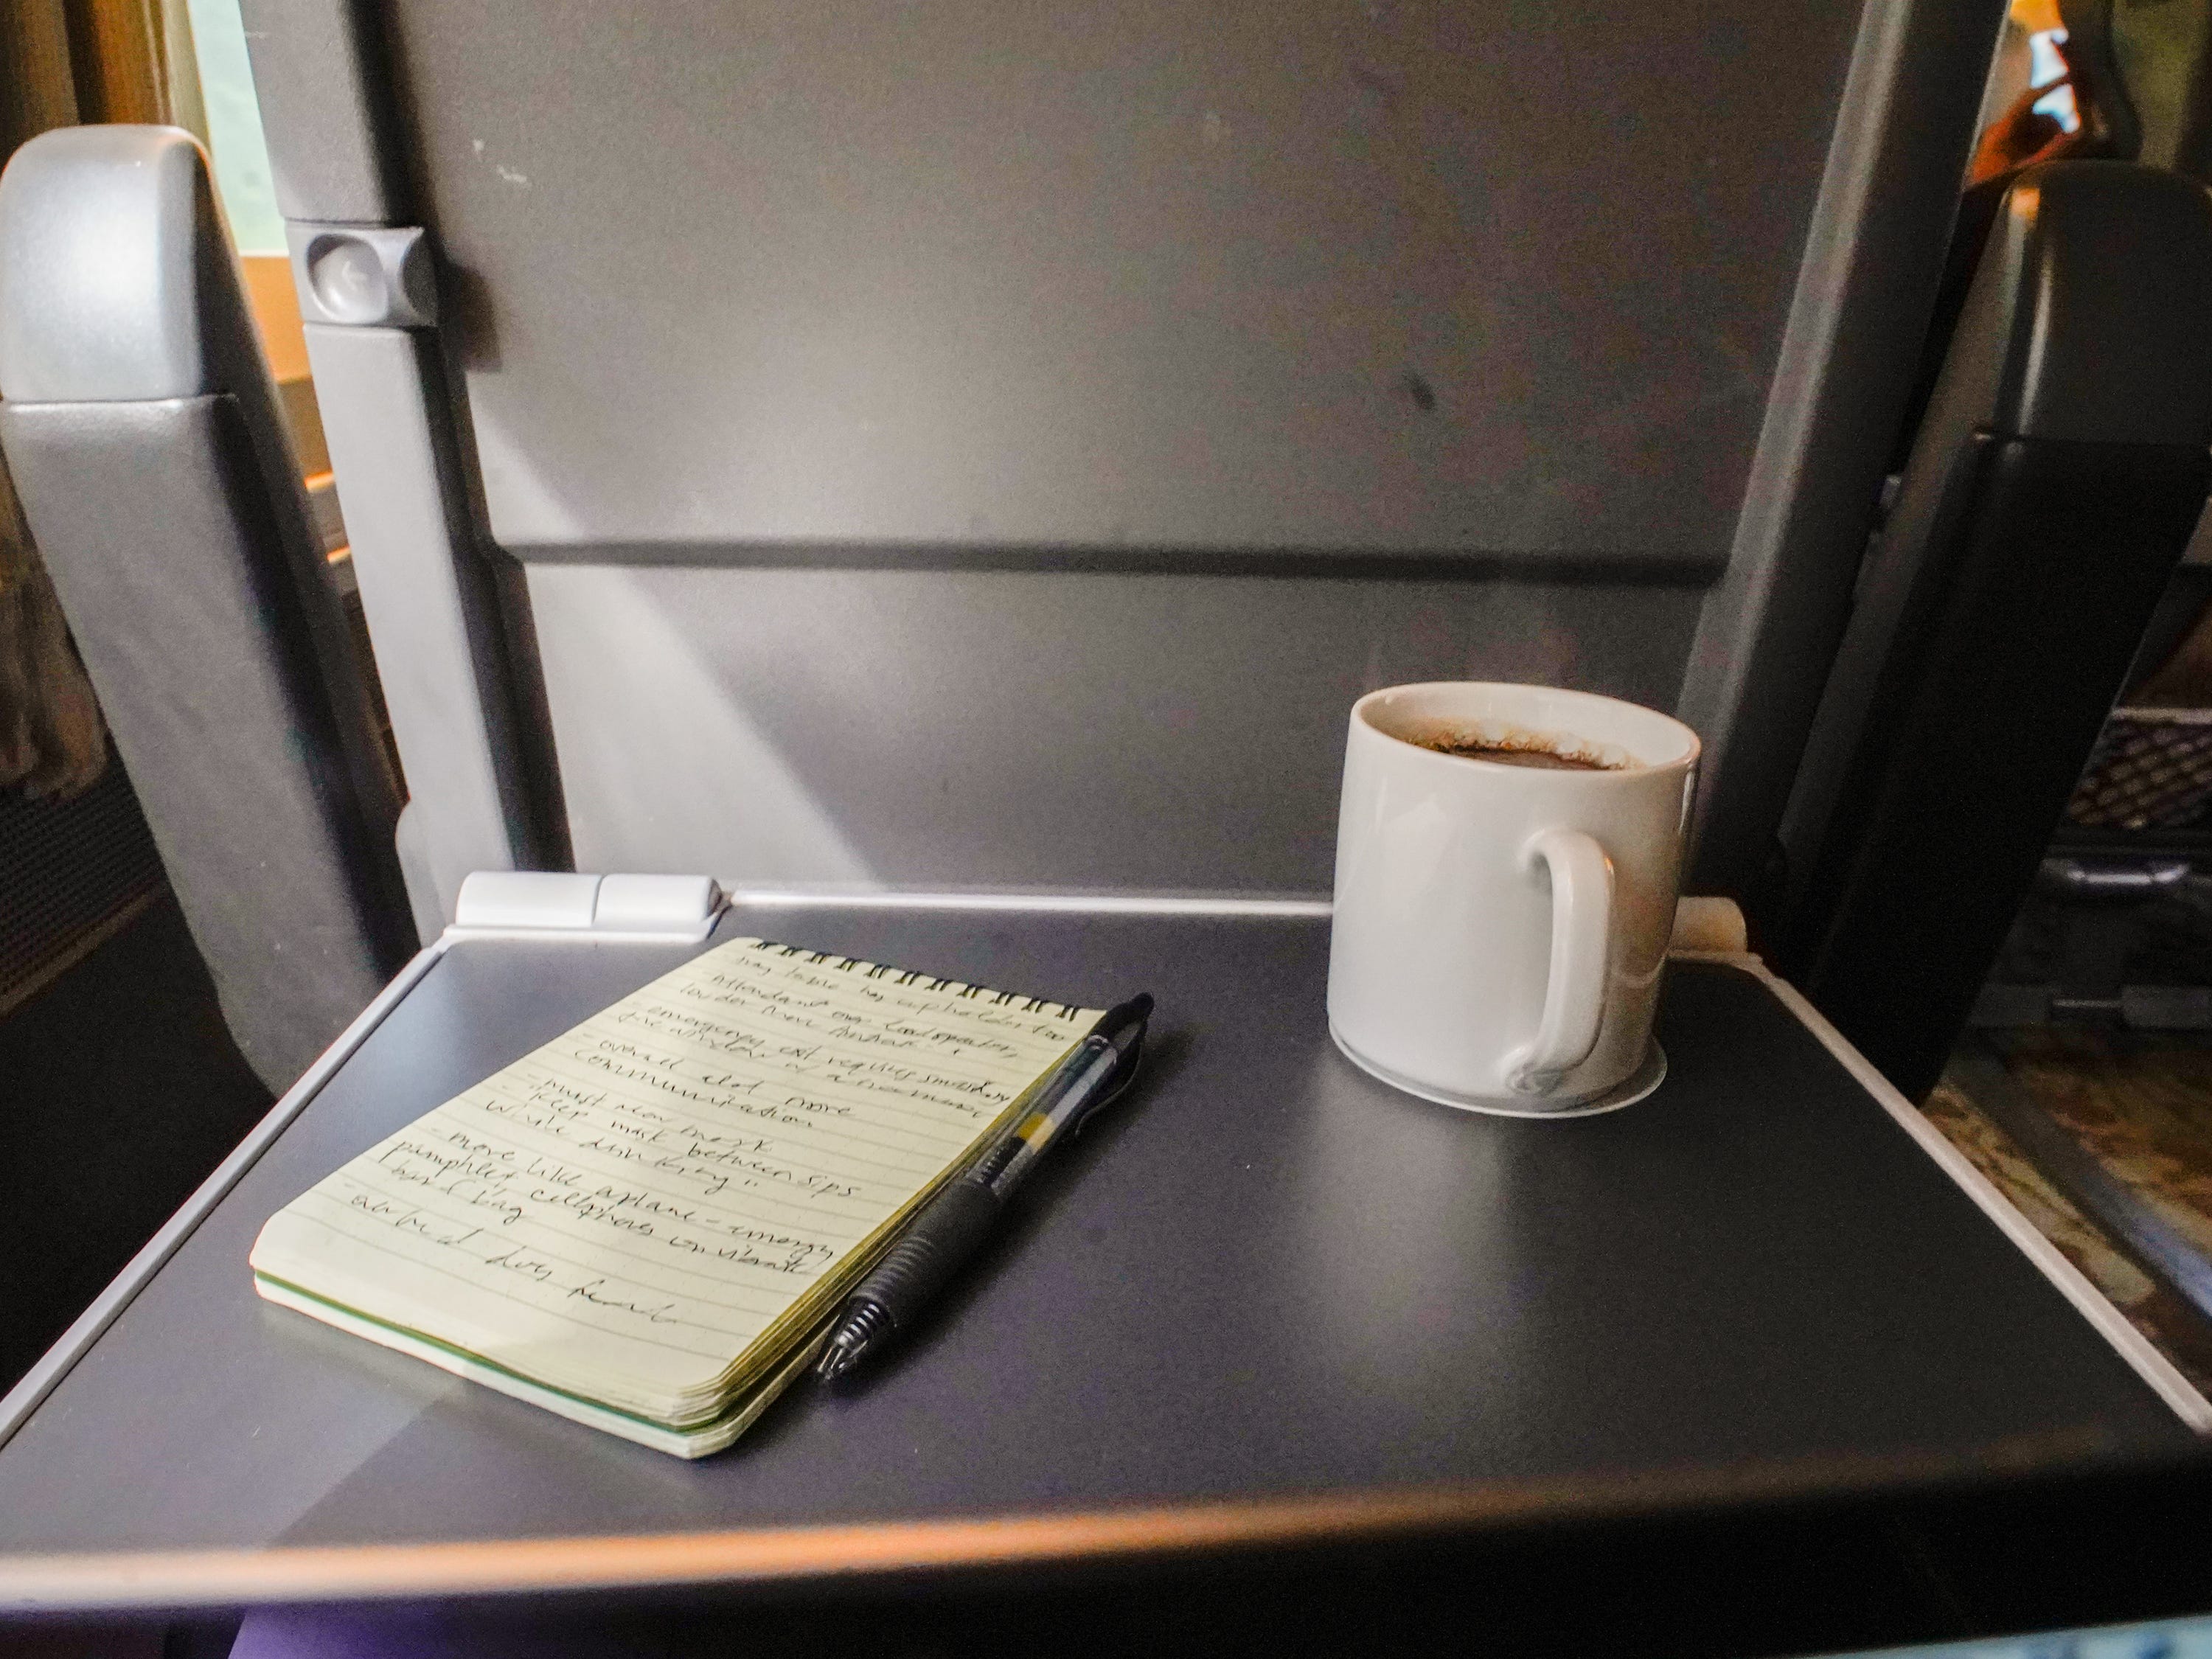 Shortly after leaving, a train attendant came around with complimentary drink service. I ordered a coffee.